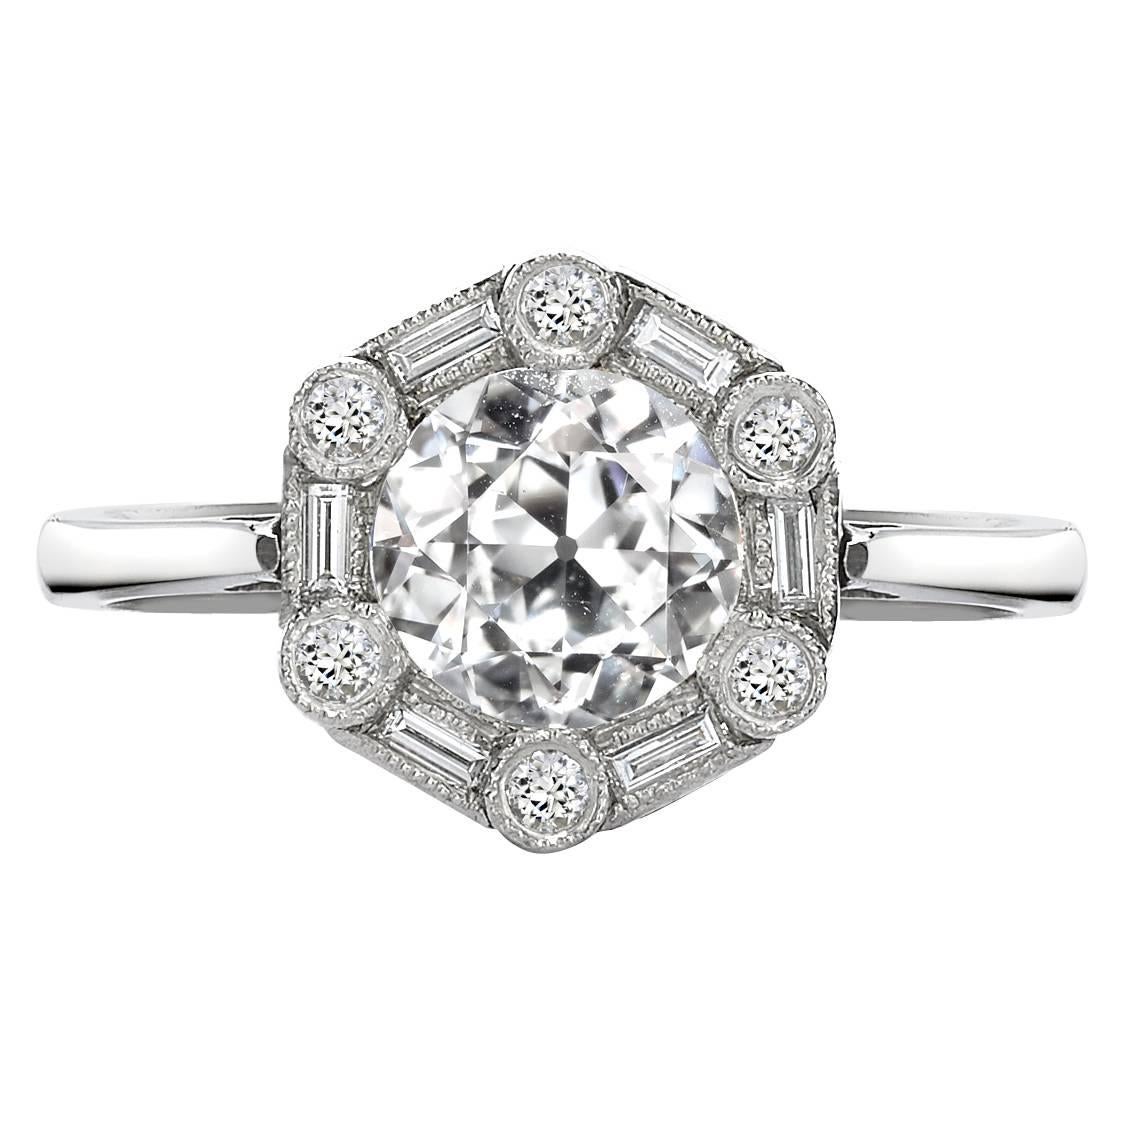 Brilliant Cut Diamond Ring with Baguette and Brilliant Cut Diamond Surround For Sale